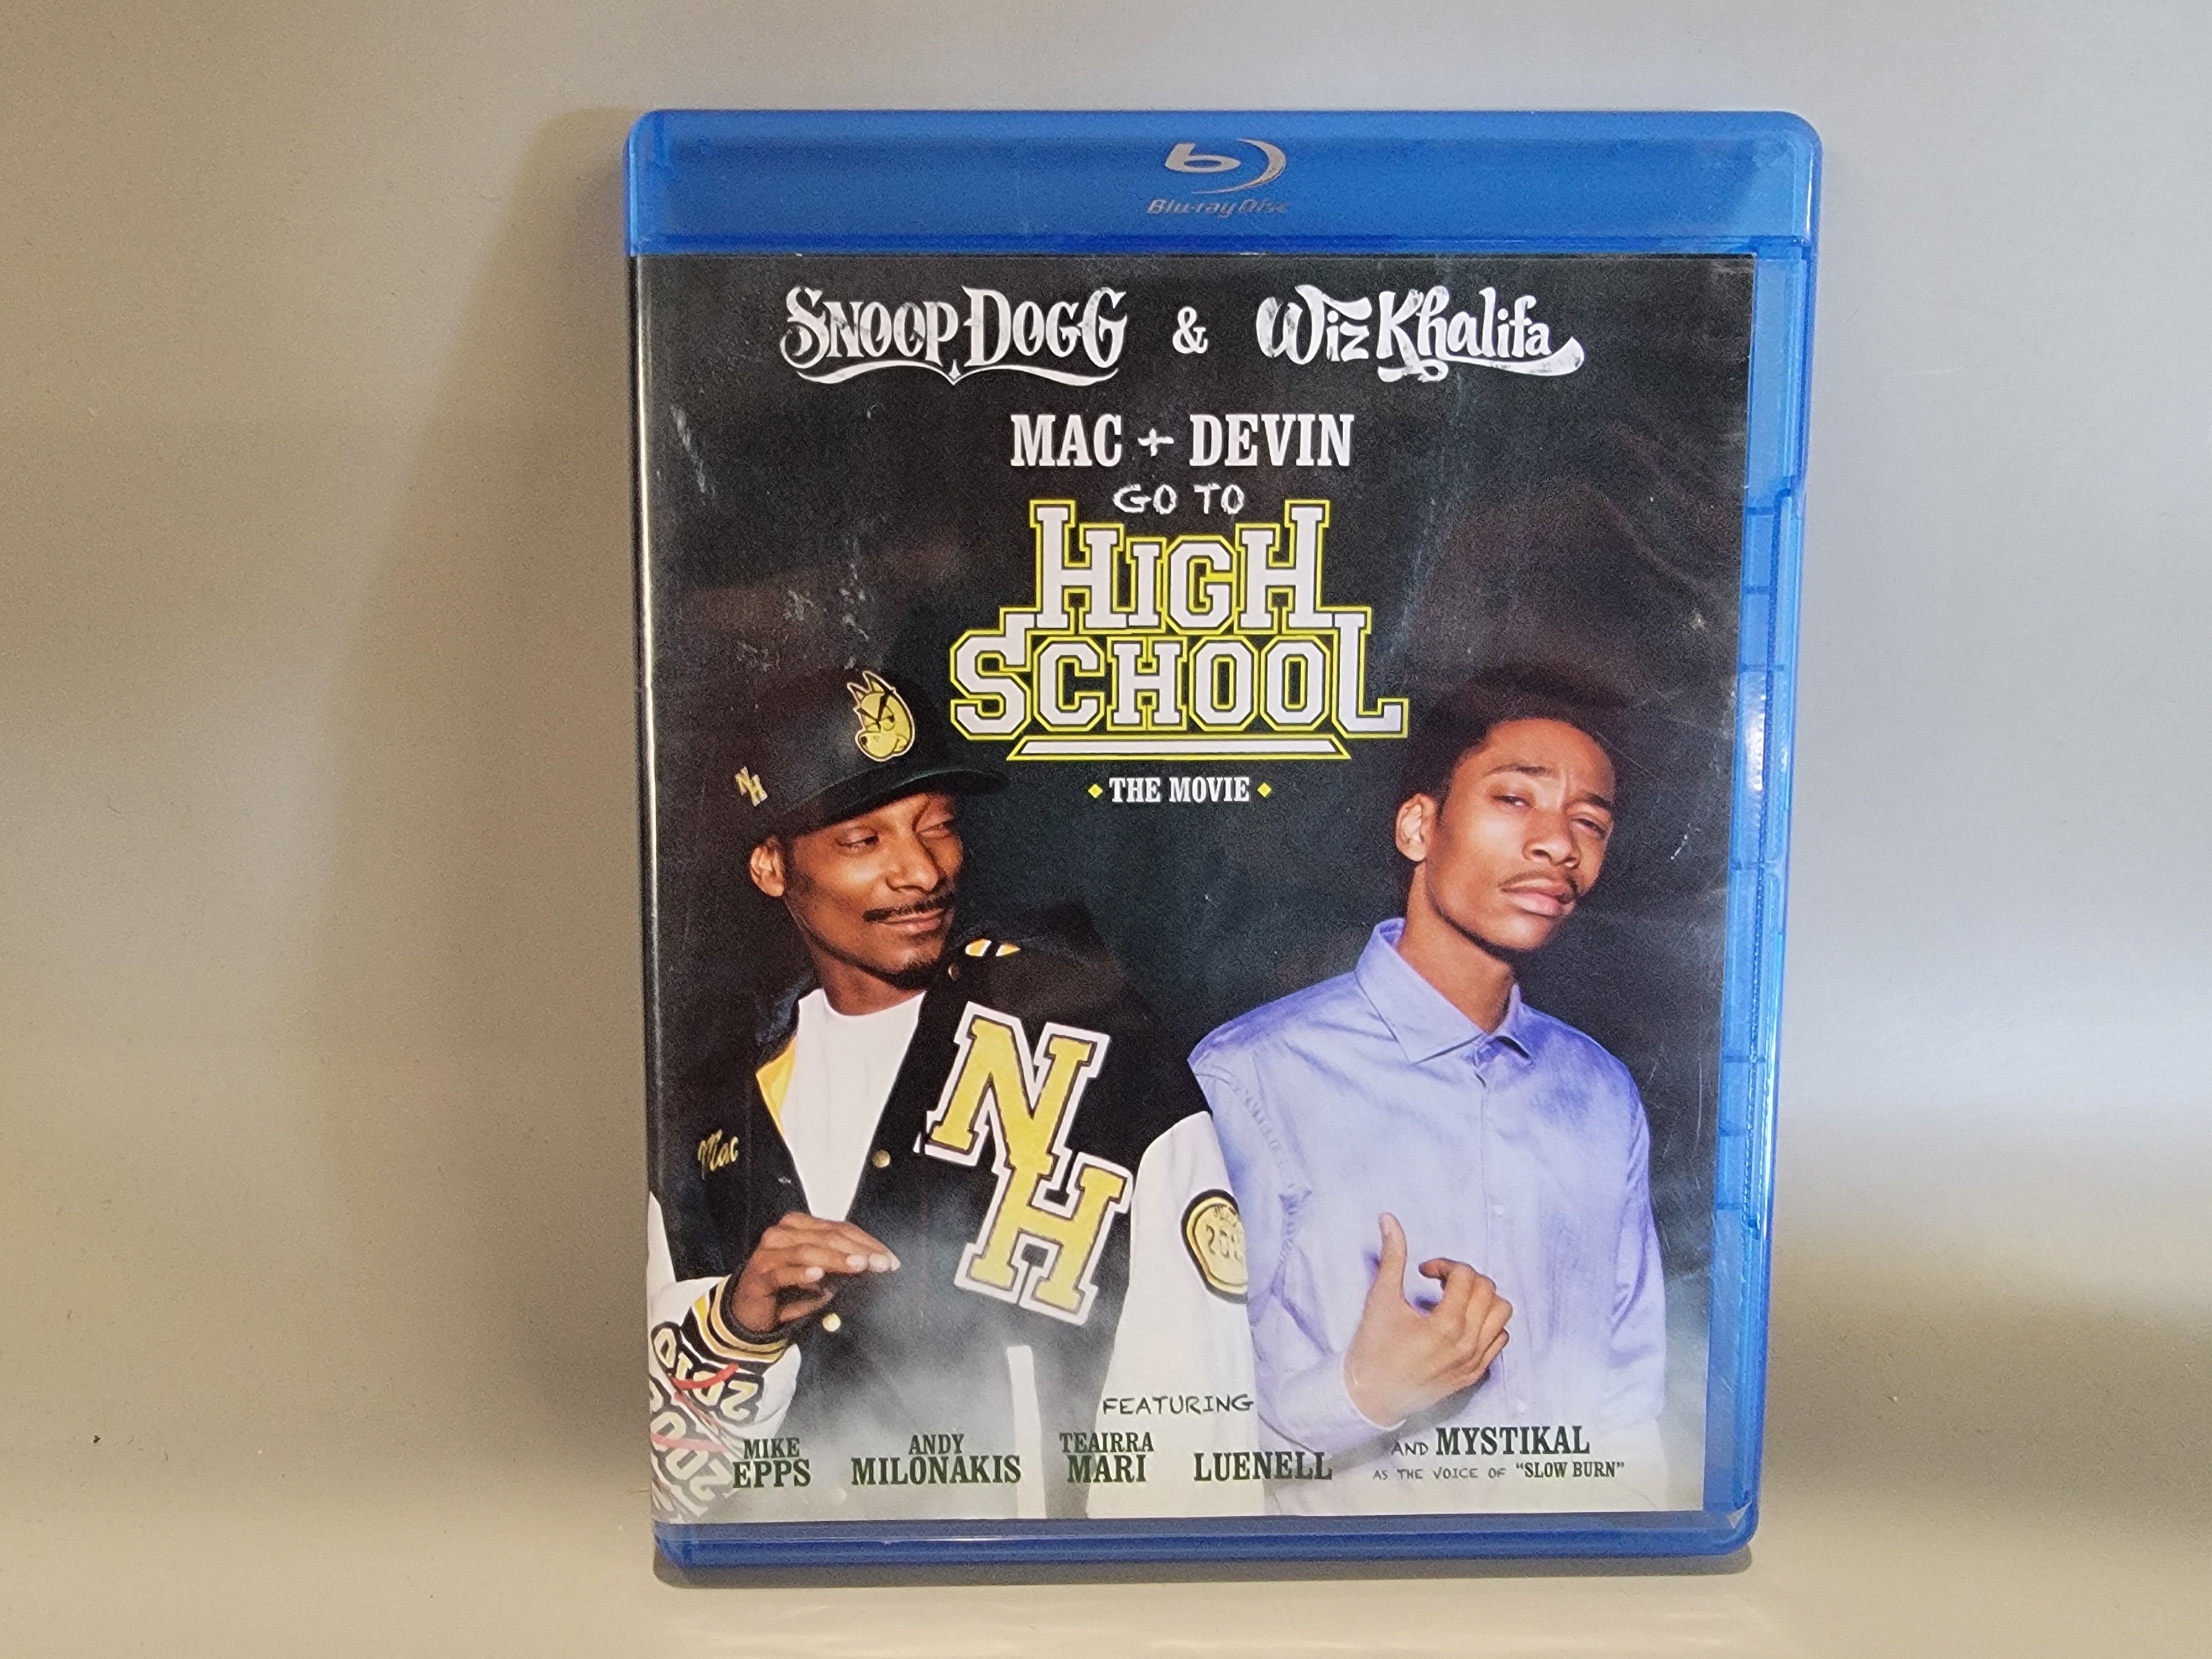 MAC AND DEVIN GO TO HIGH SCHOOL BLU-RAY [USED]